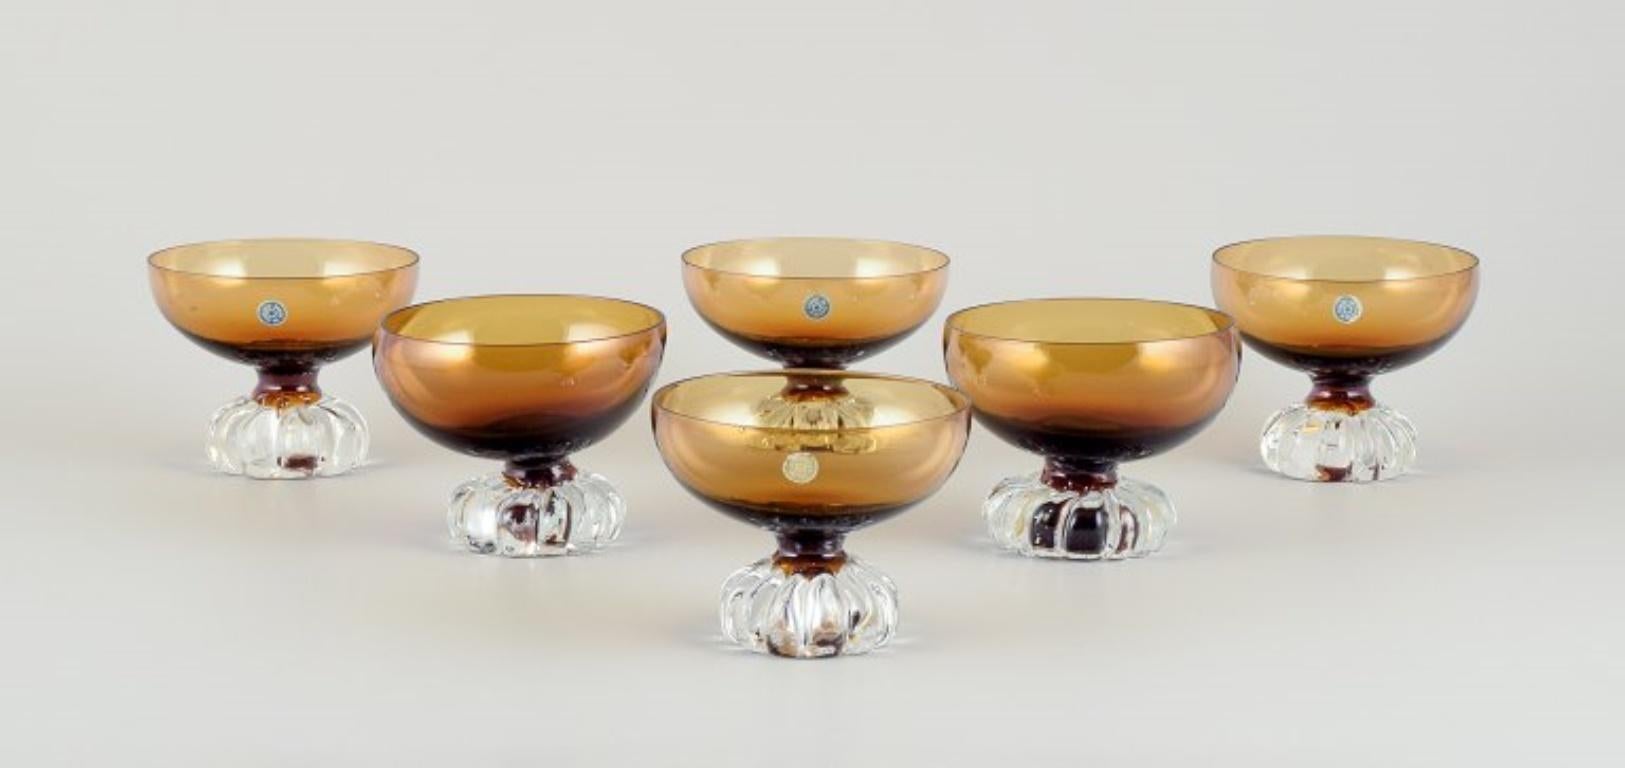 Åseda Glasbruk. 
A set of six cocktail glasses/dessert bowls in mouth-blown art glass.
1960s.
In perfect condition.
With labels.
Dimensions: Diameter 10.0 cm x Height 8.0 cm.